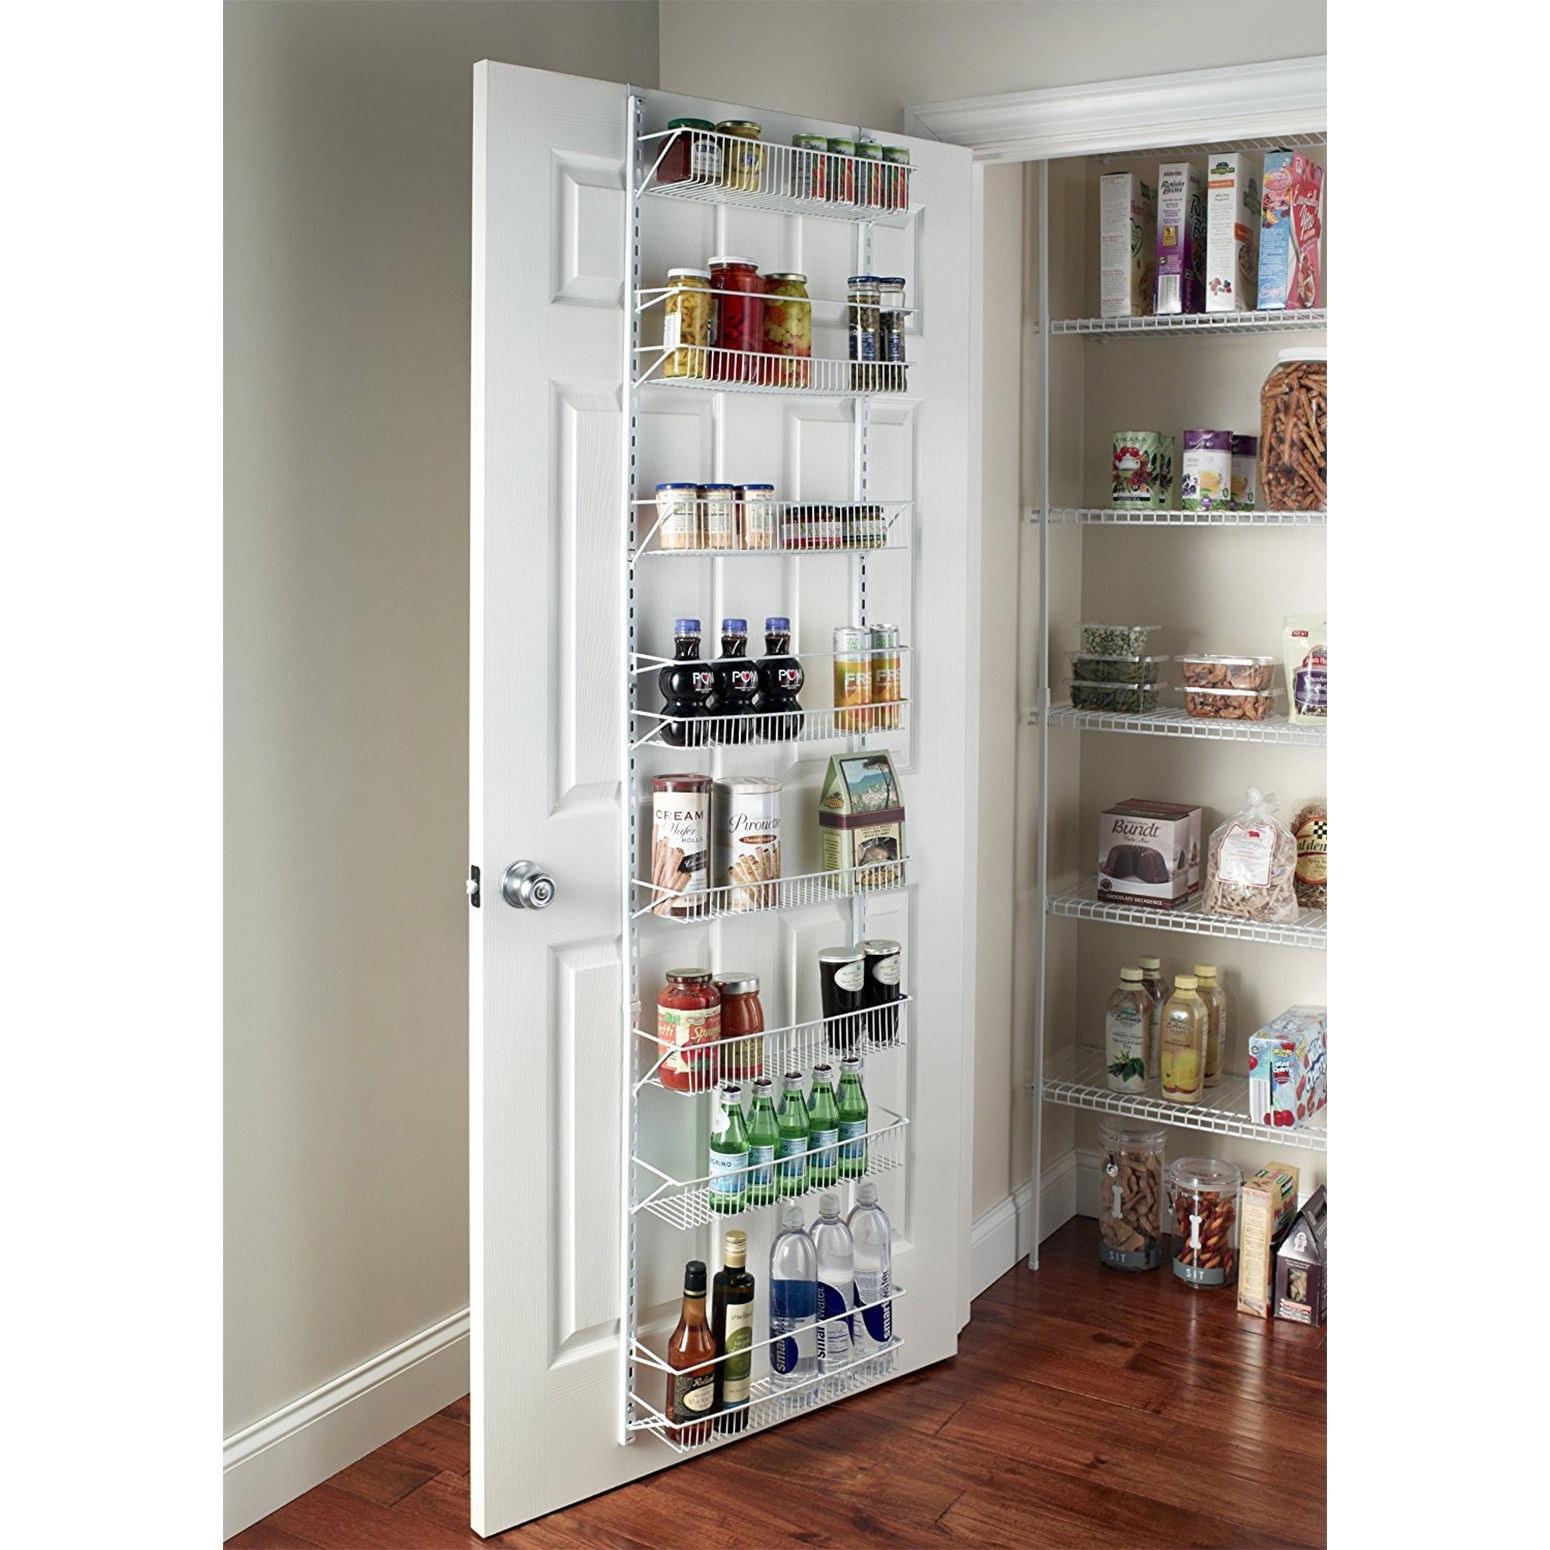 https://ak1.ostkcdn.com/images/products/is/images/direct/75522005df81def1215dbbe2248ae23d3e0b69a9/24-Inch-Wide-Adjustable-Door-Rack-Pantry-Organizer.jpg